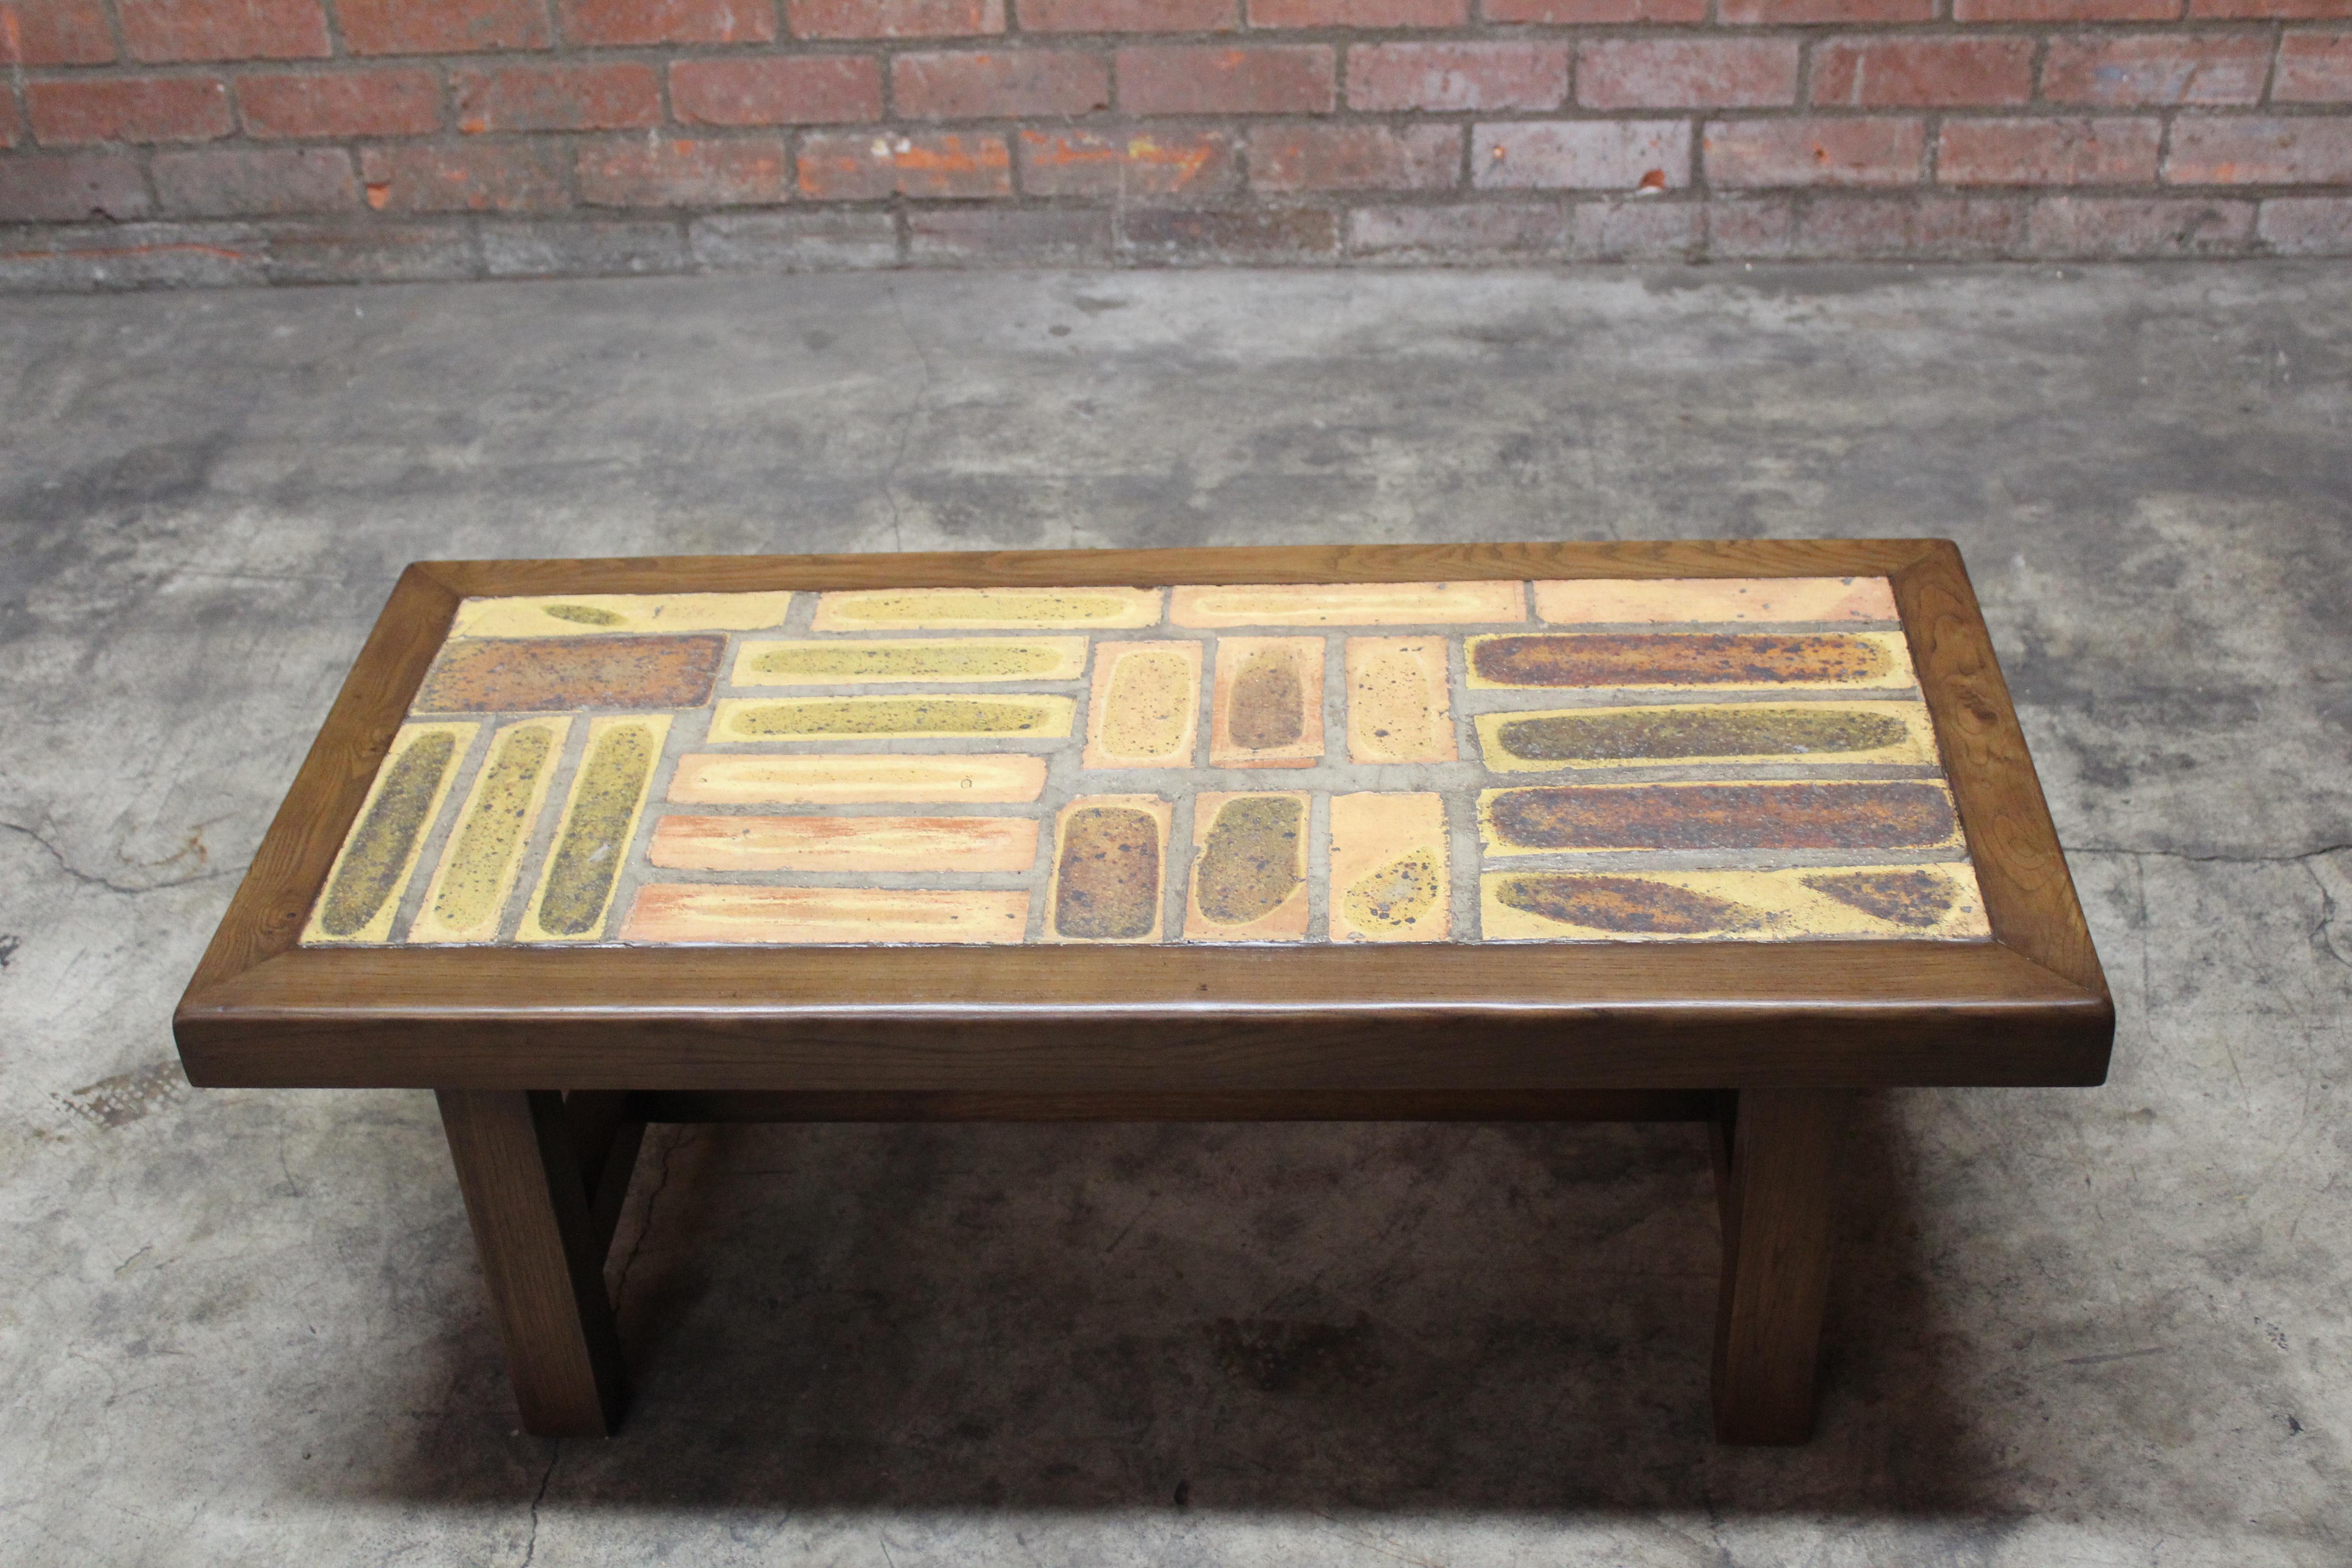 1960s French Modernist Ceramic Tile and Walnut Coffee Table 1